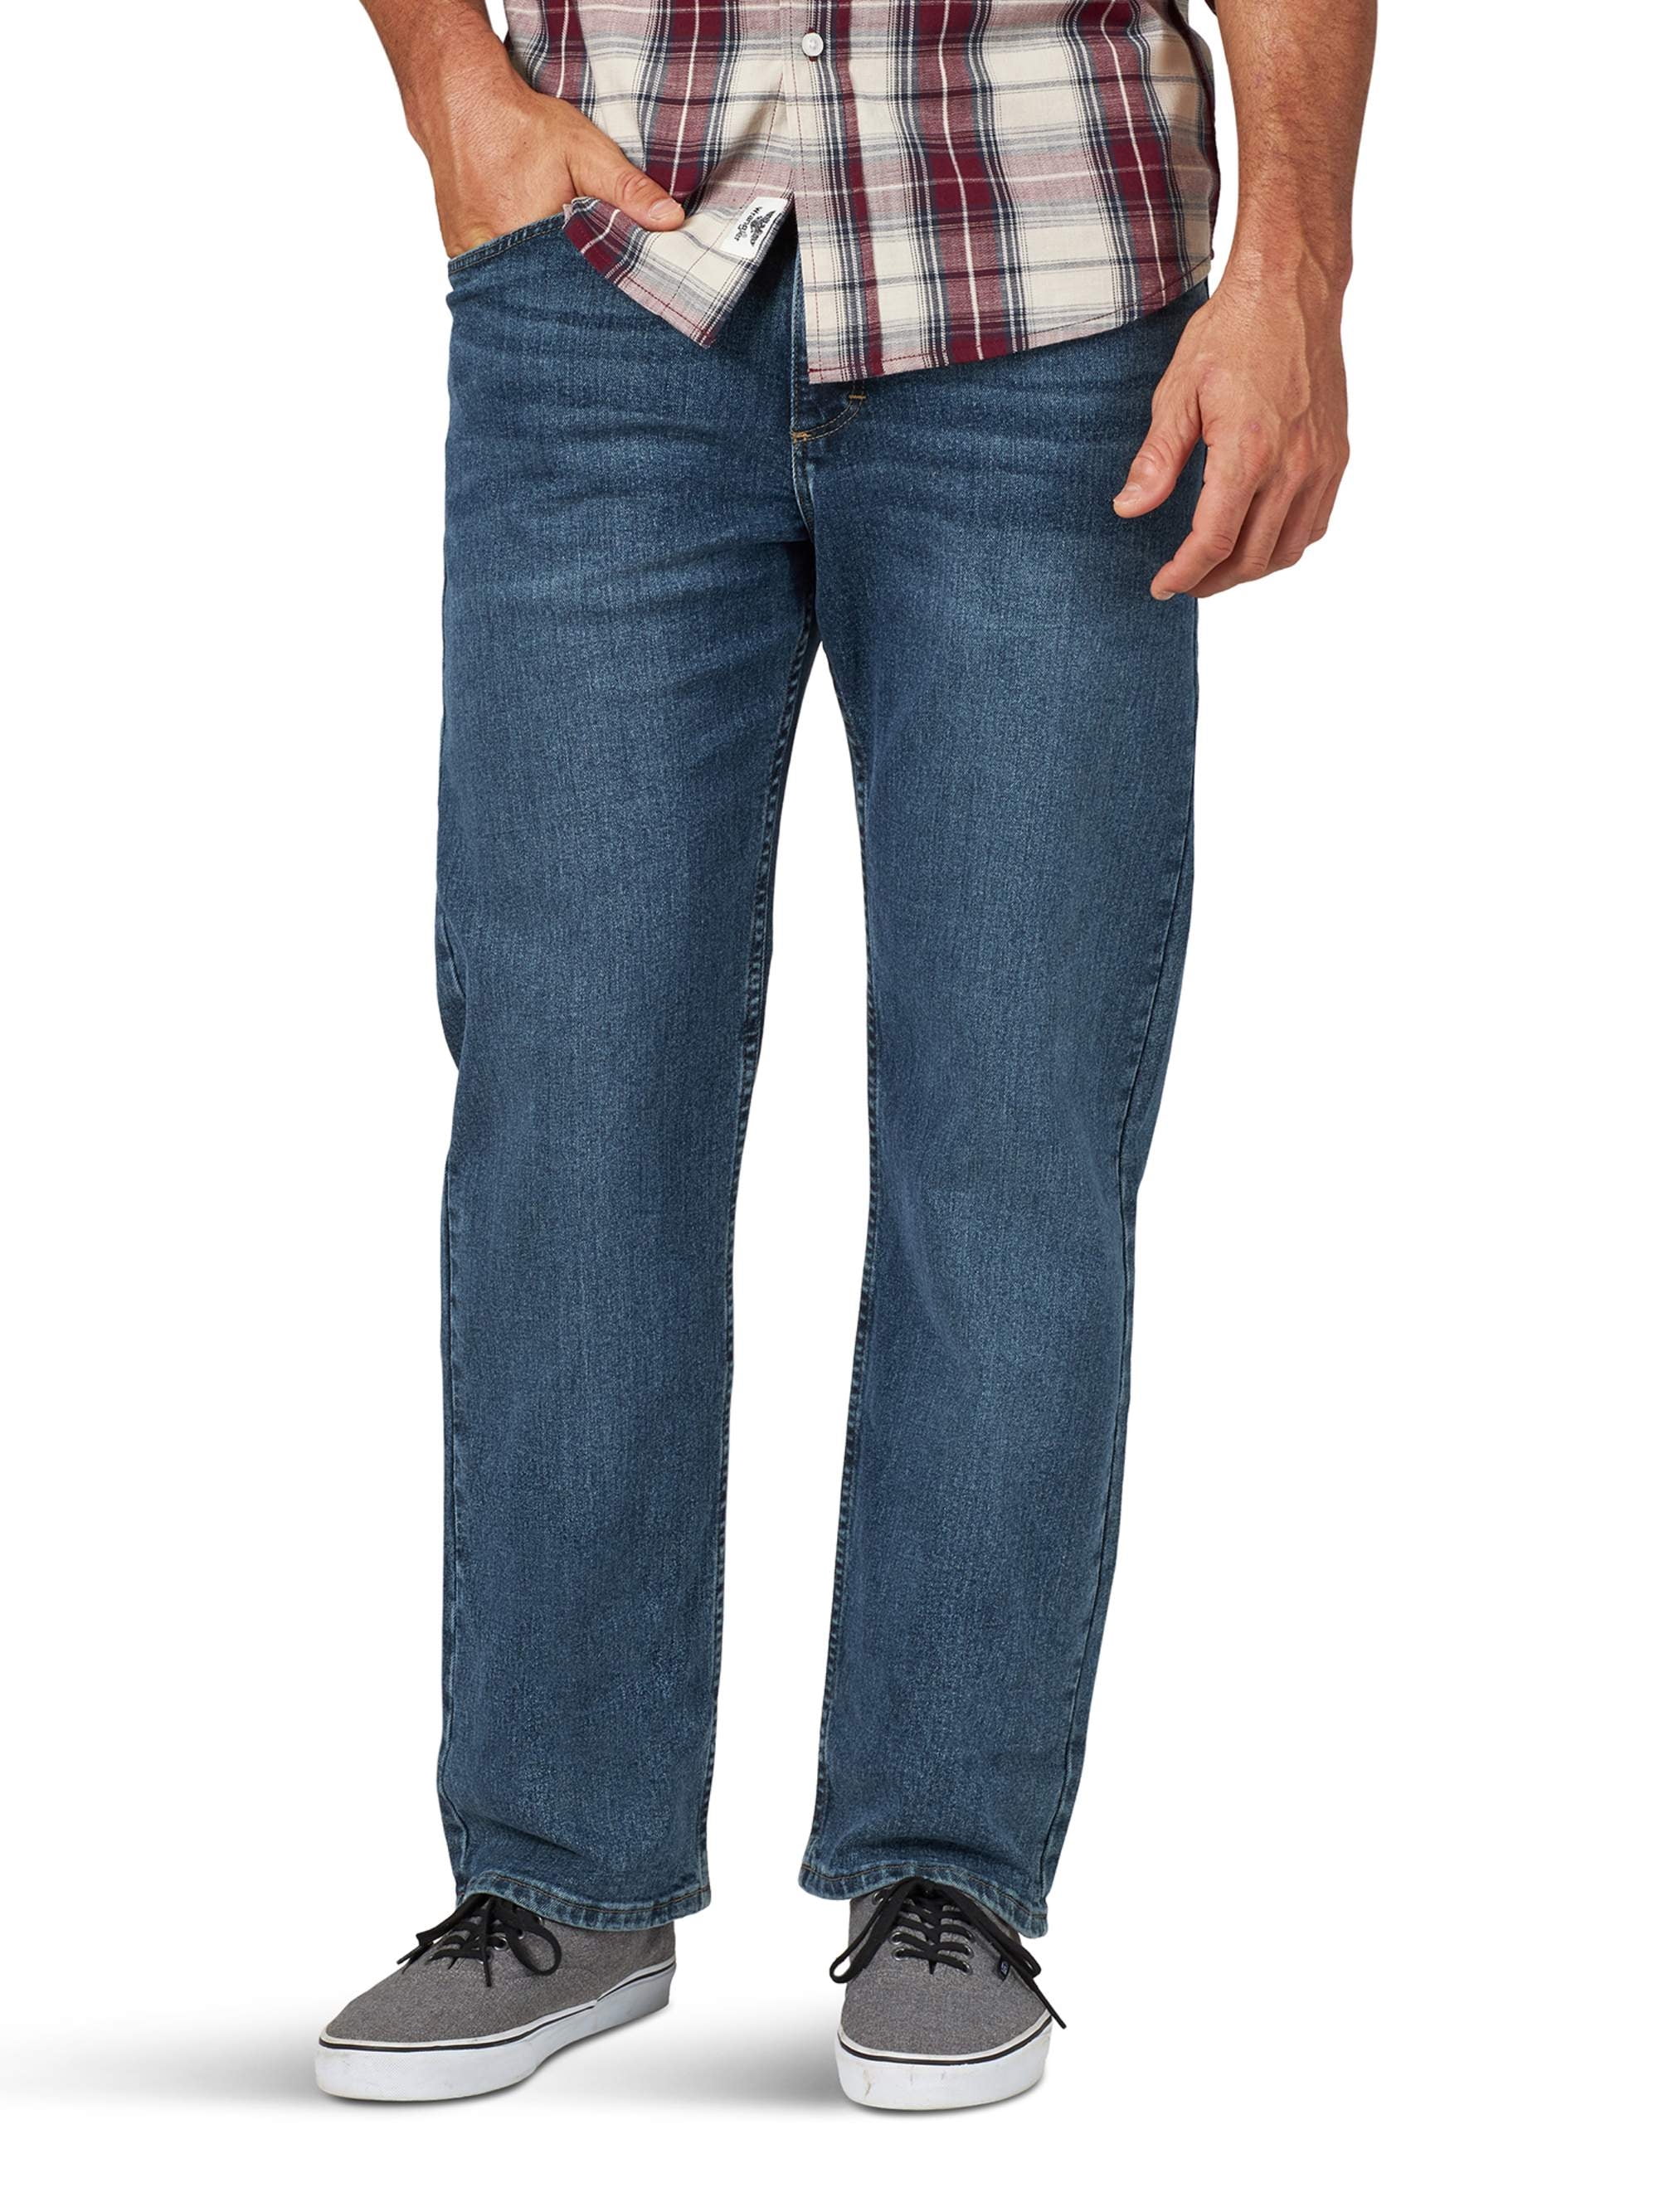 Performance Series Relaxed Fit Jean 